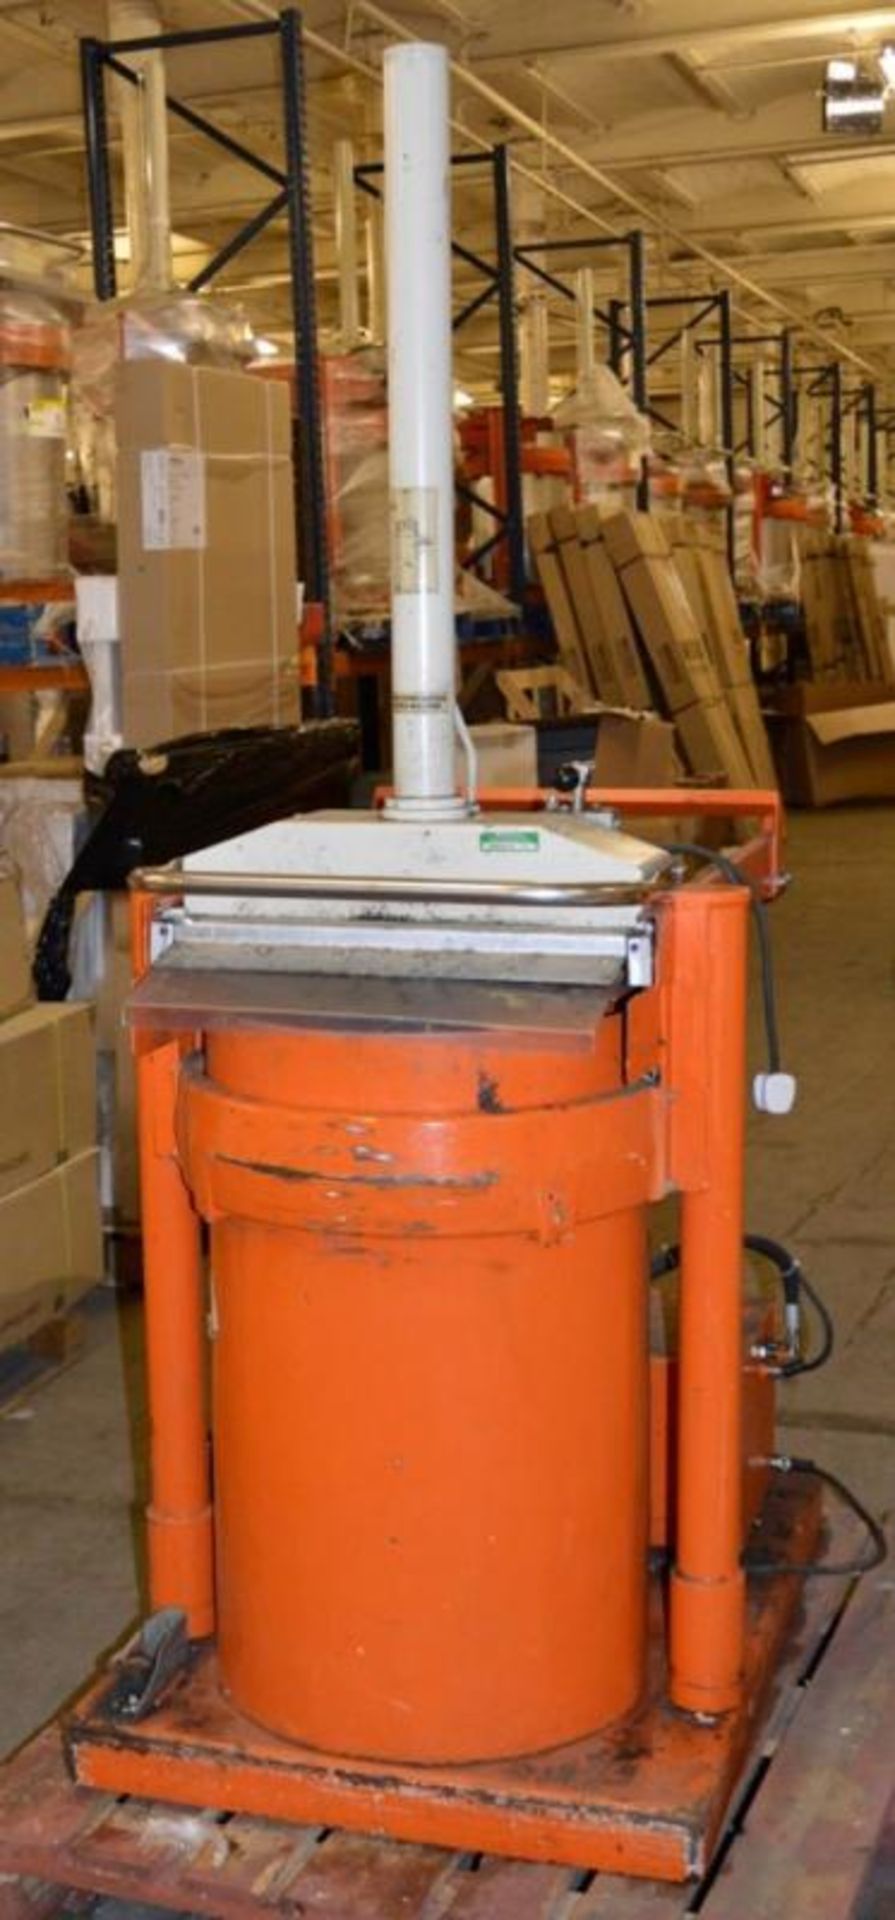 1 x Orwak 5030 Waste Compactor Bailer - Used For Compacting Recyclable or Non-Recyclable Waste - Red